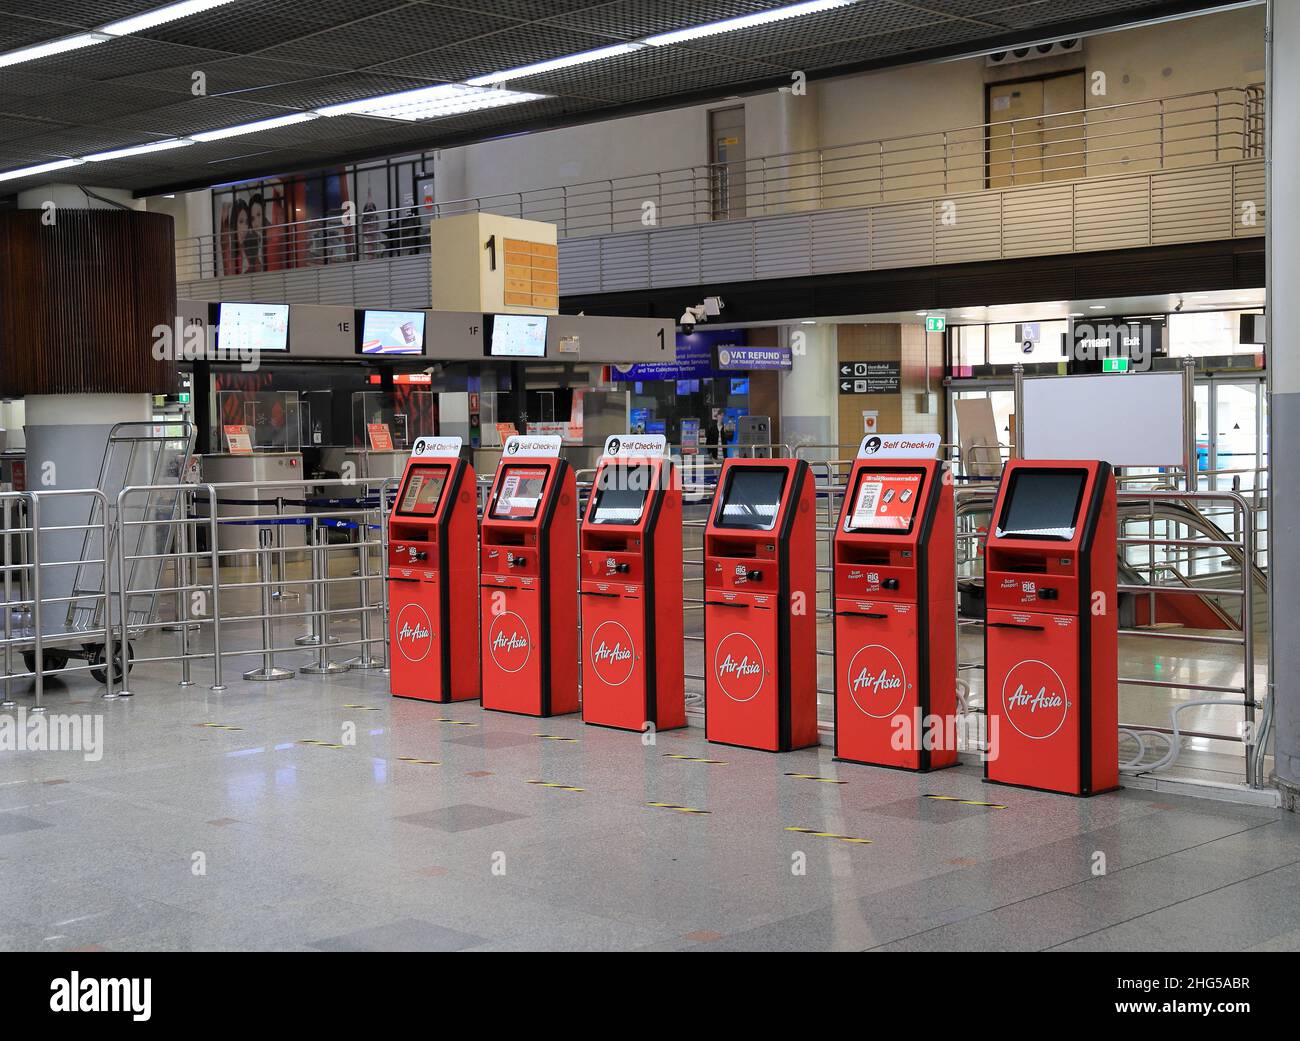 Airport check in terminals, Self service machine or airline check-in kiosk at airport for check in, printing boarding pass or buying ticket. Stock Photo